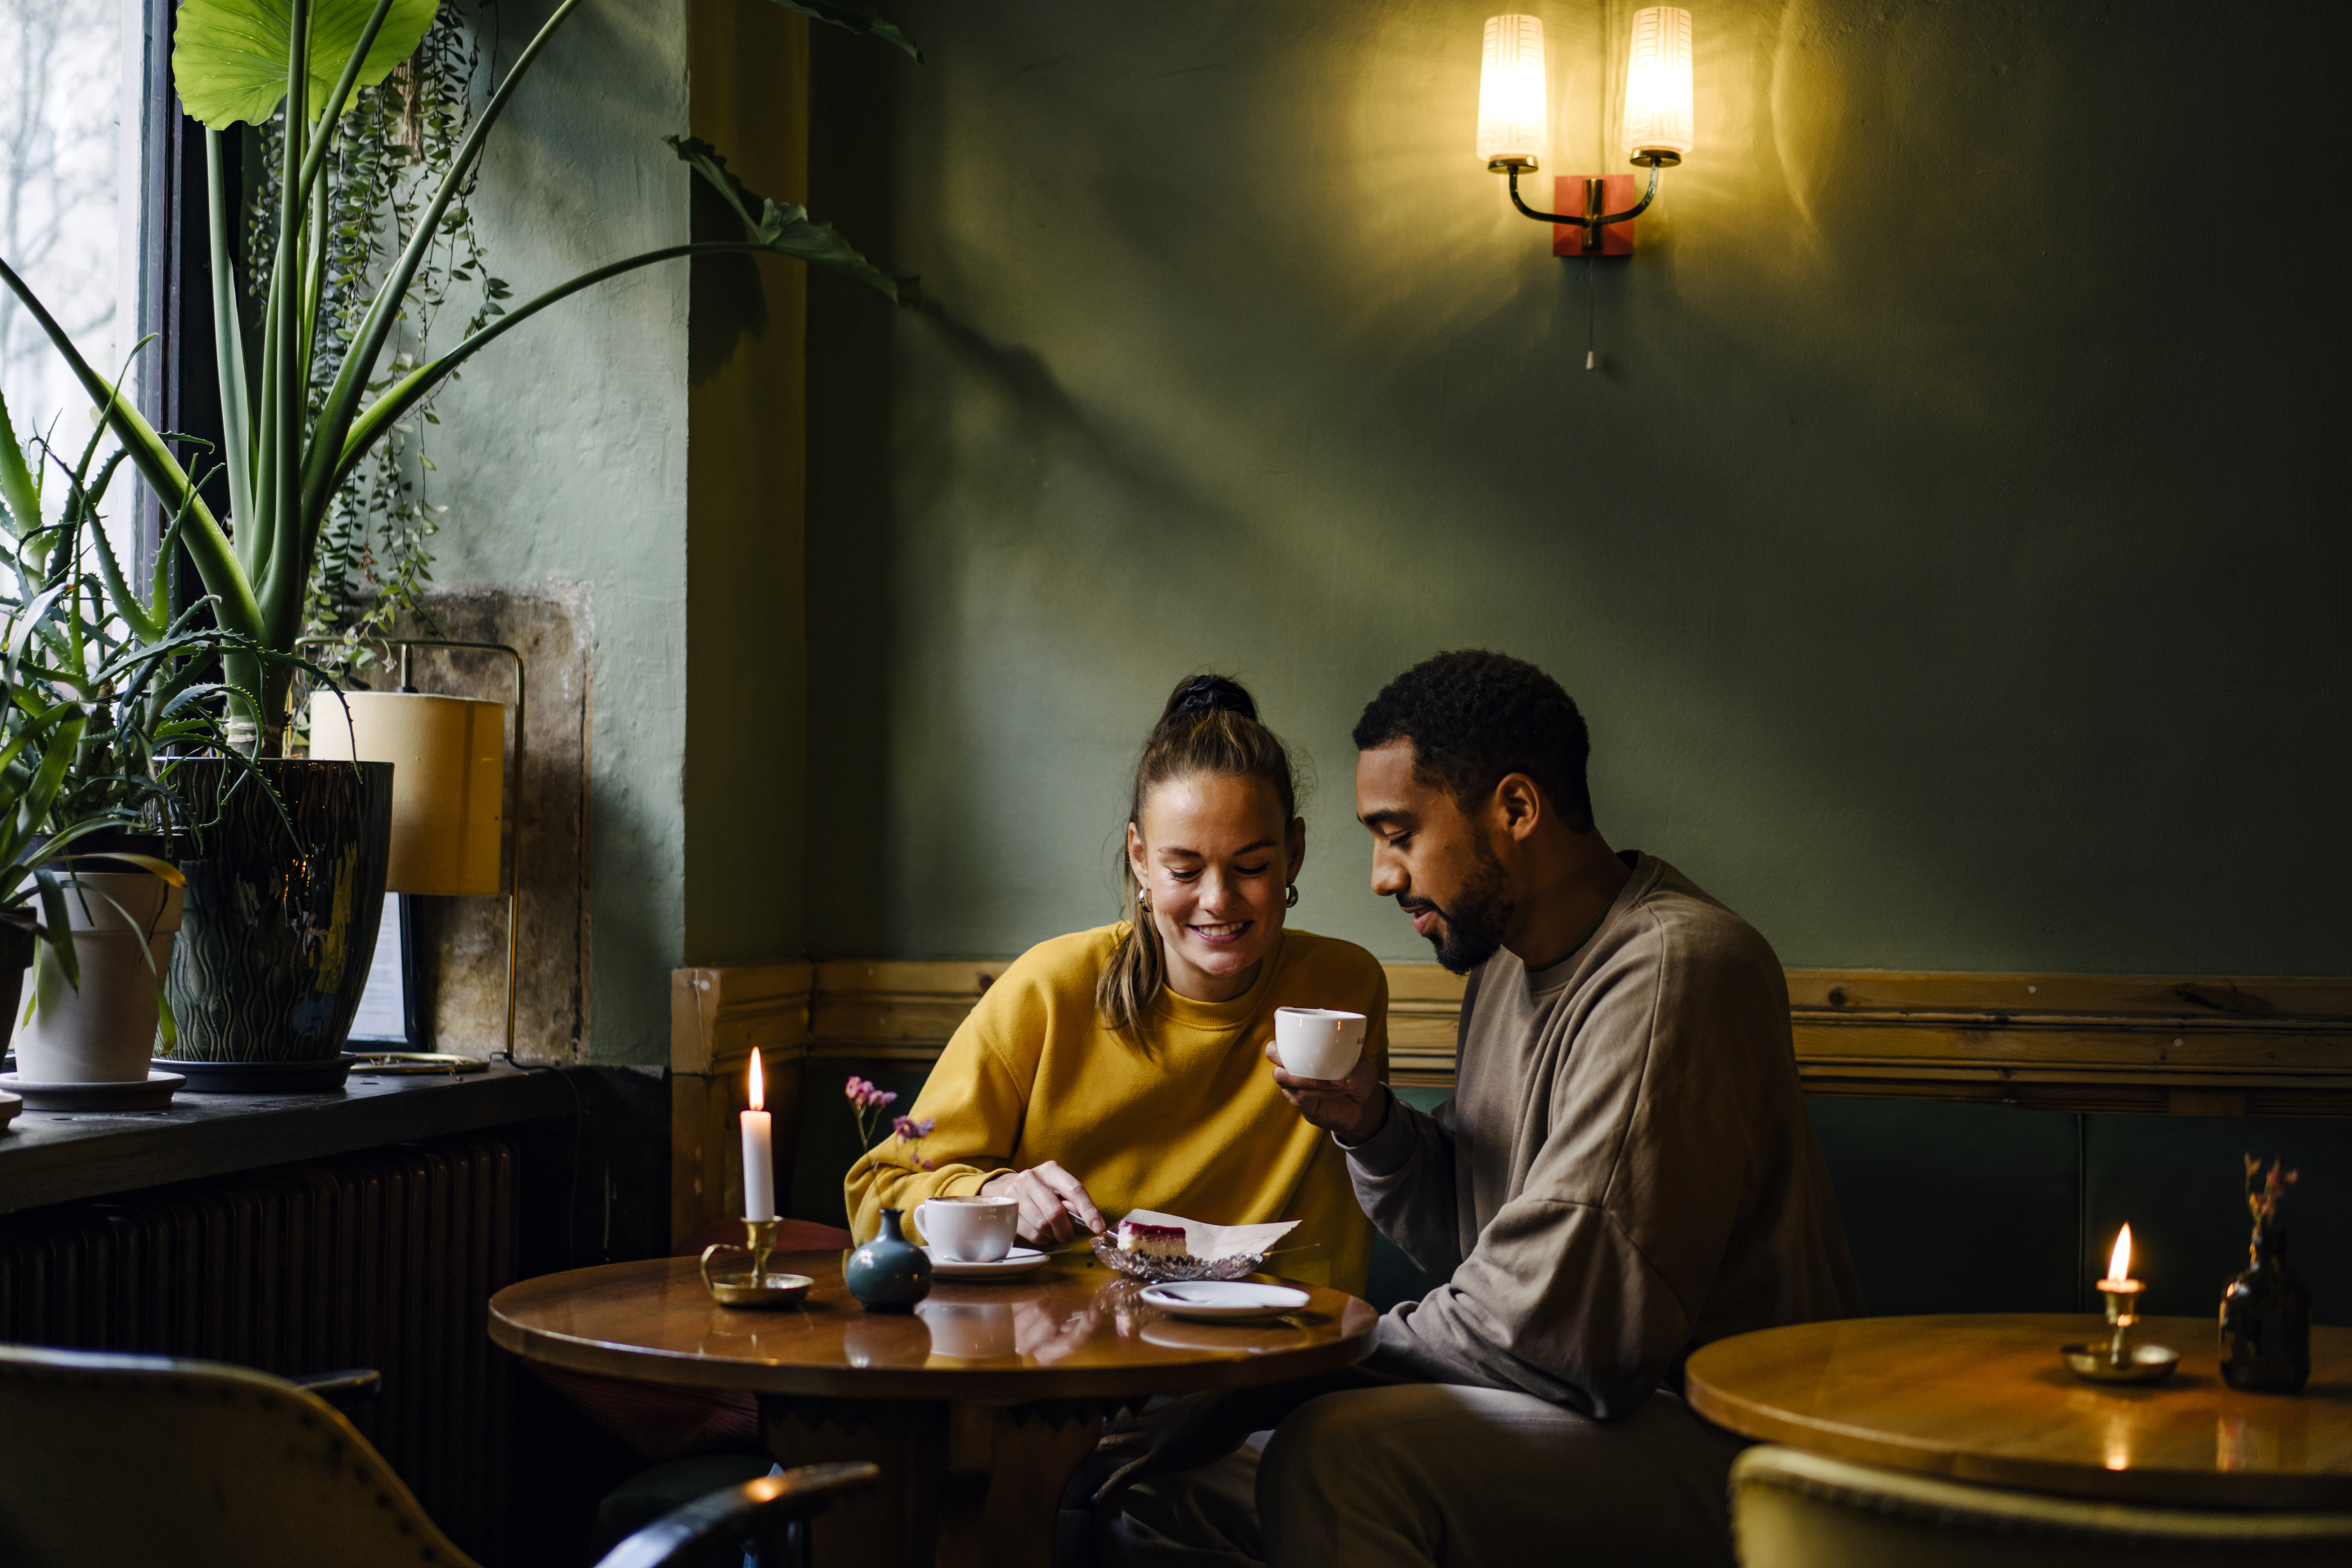 Couple at a restaurant | Source: Getty Images